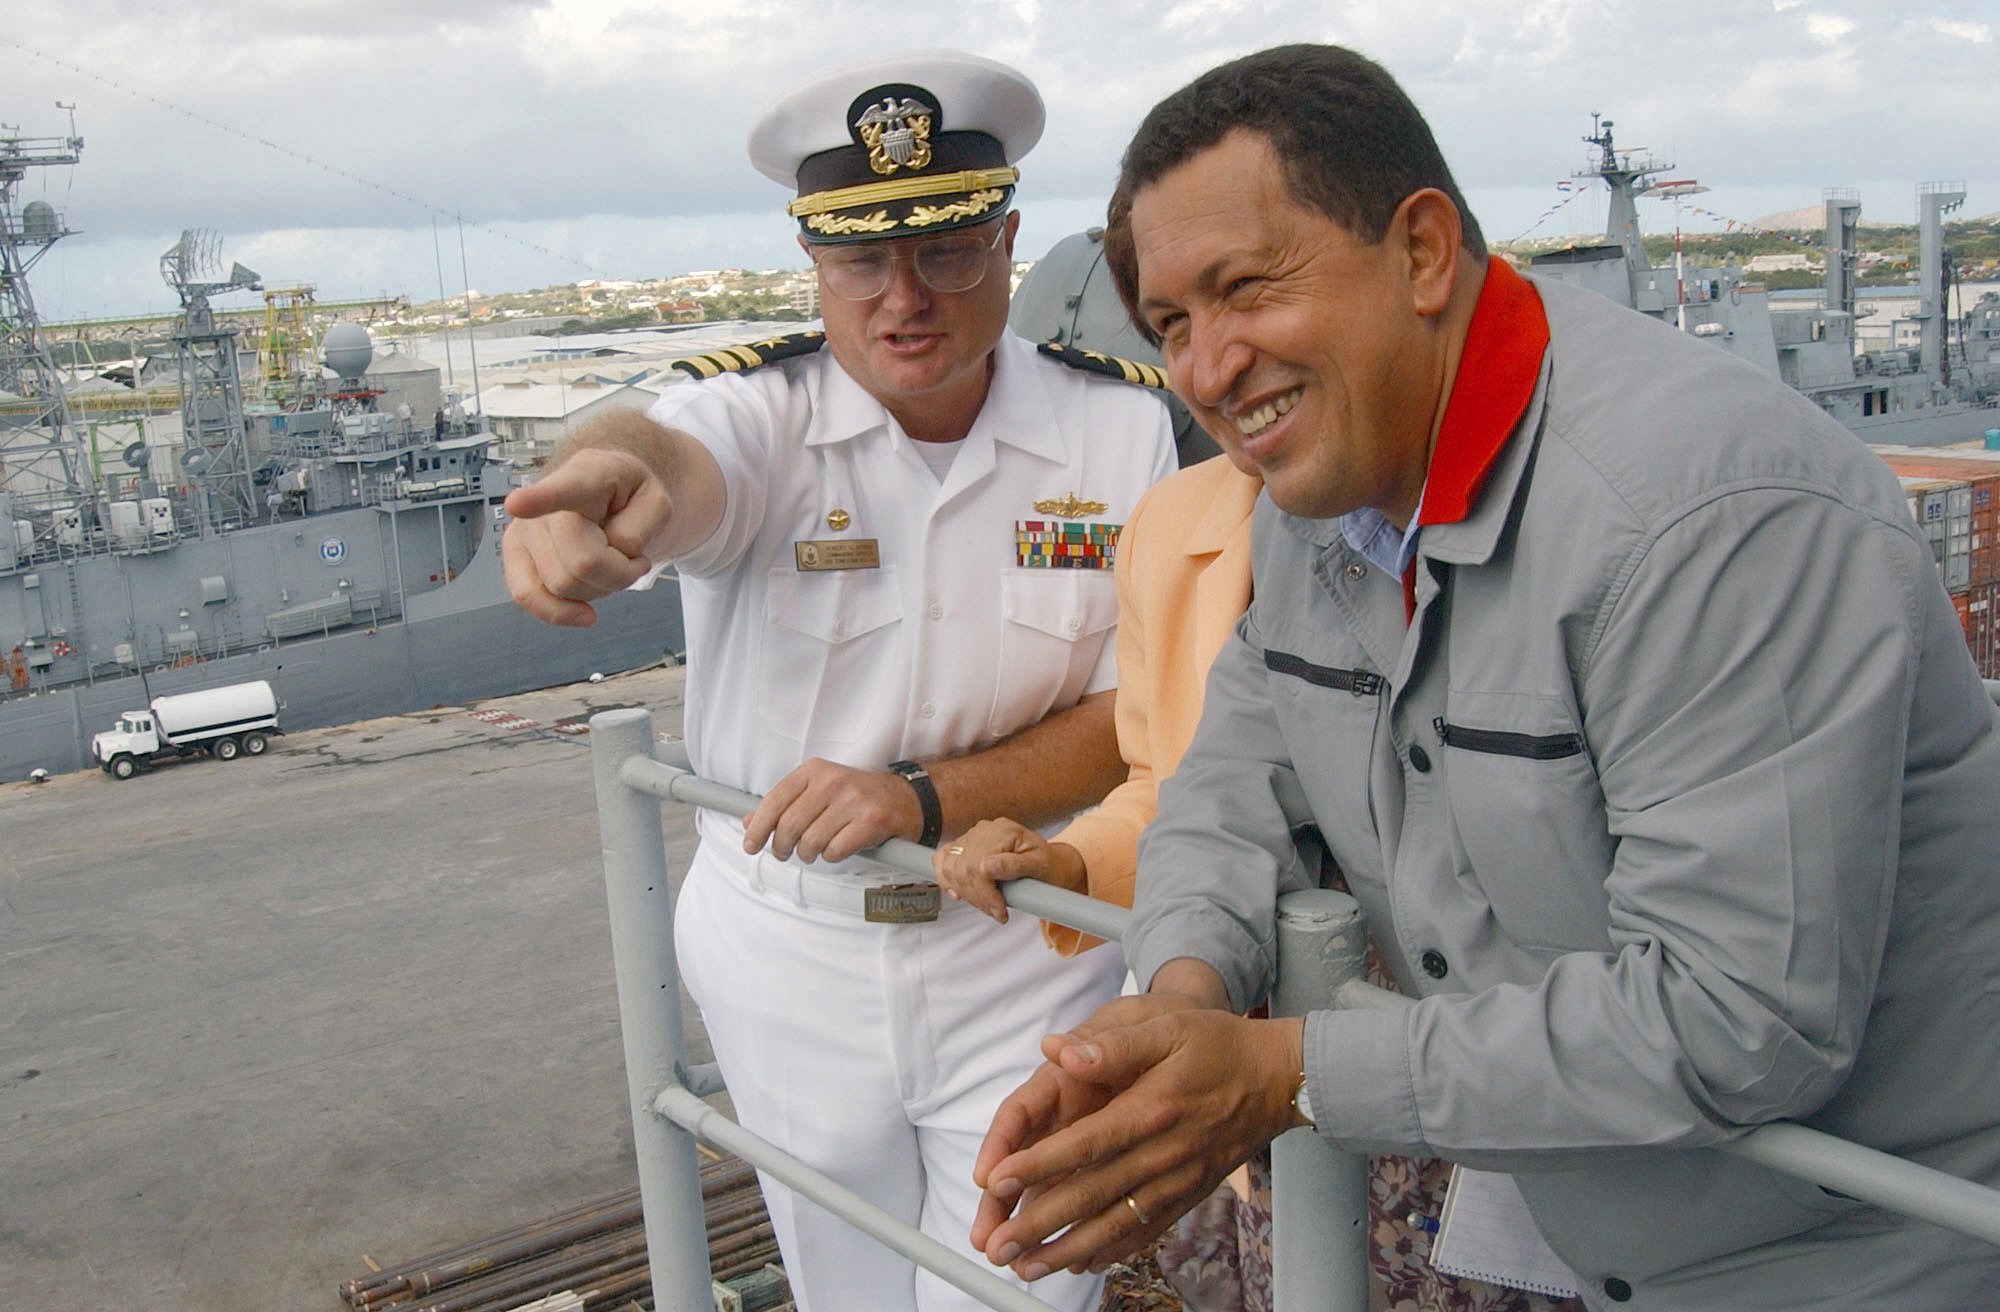 US Navy (USN) Commander (CDR) Robert S. Kerno (left), Commanding Officer (CO), USN Ticonderoga Class Cruiser USS YORKTOWN (CG 48), points out some sights to the President of Venezuela, Hugo Chavez during a tour of the ship. The YORKTOWN is visiting the city of Willemstad at Curacao, Netherlands Antilles north of Venezuela during the 43rd annual UNITAS (Unity in Spanish) exercise. UNITAS is the largest multi-national naval exercise conducted by US, Caribbean, Central, and South American naval forces with the focus on building a hemispheric coalition for mutual defense and cooperation.